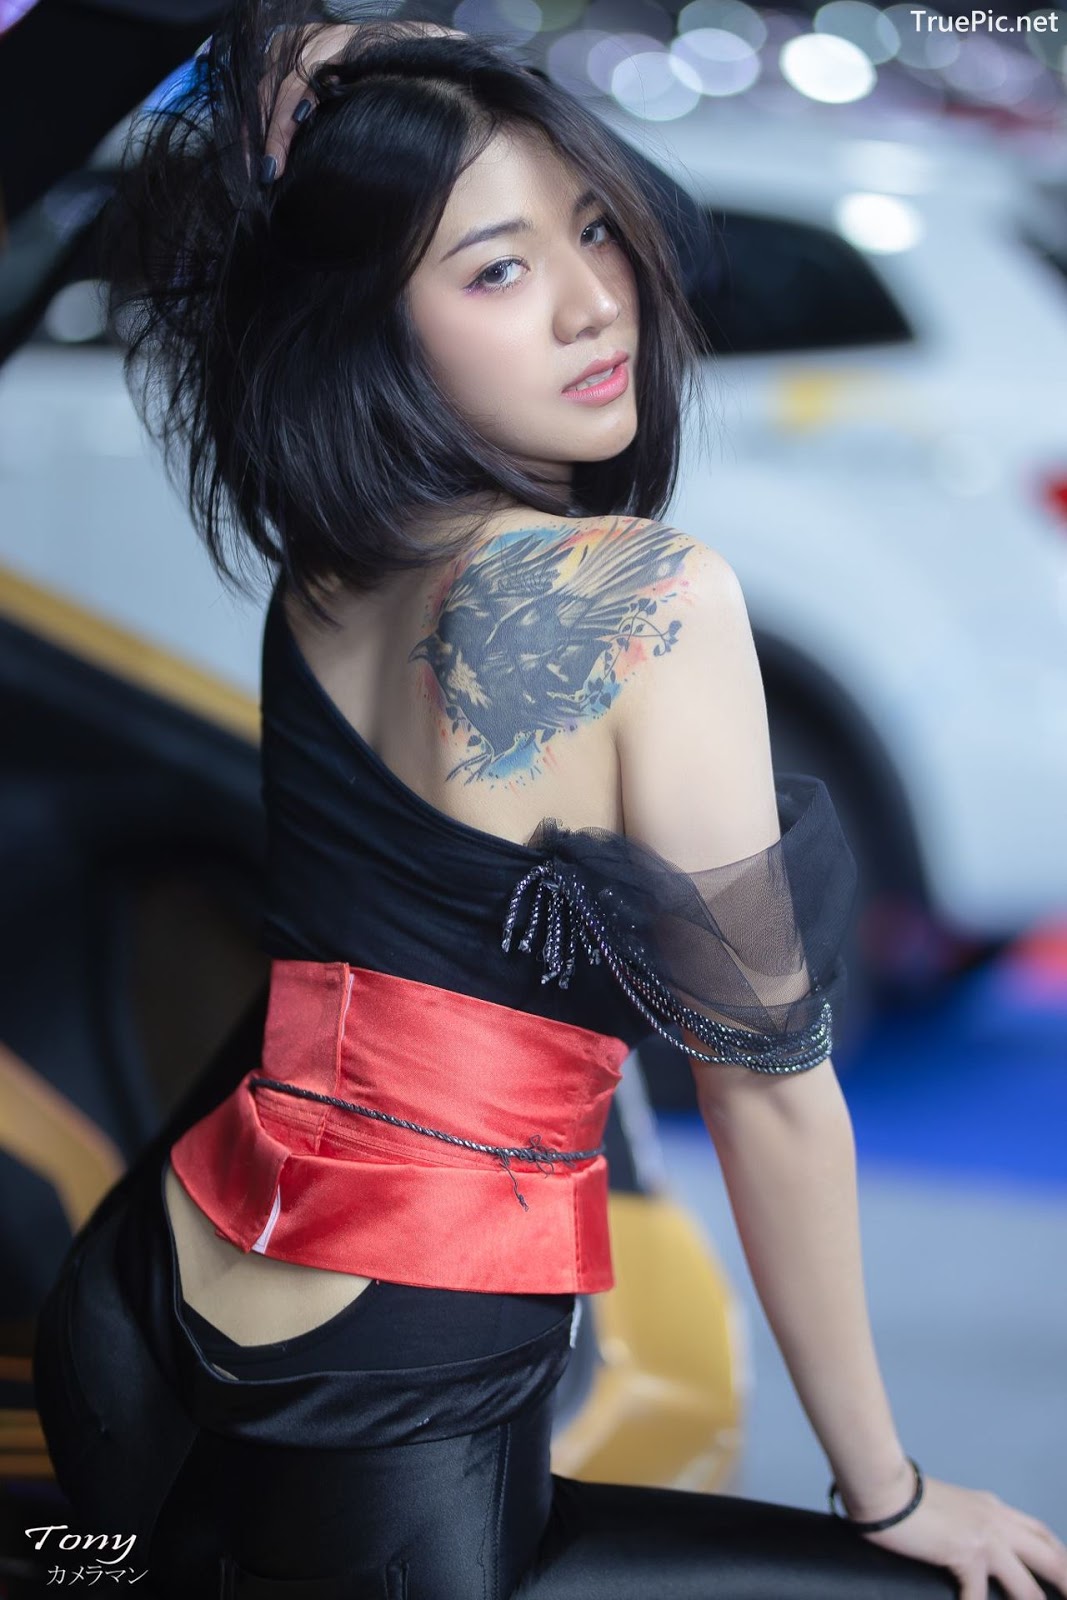 Image-Thailand-Hot-Model-Thai-Racing-Girl-At-Motor-Expo-2018-TruePic.net- Picture-69